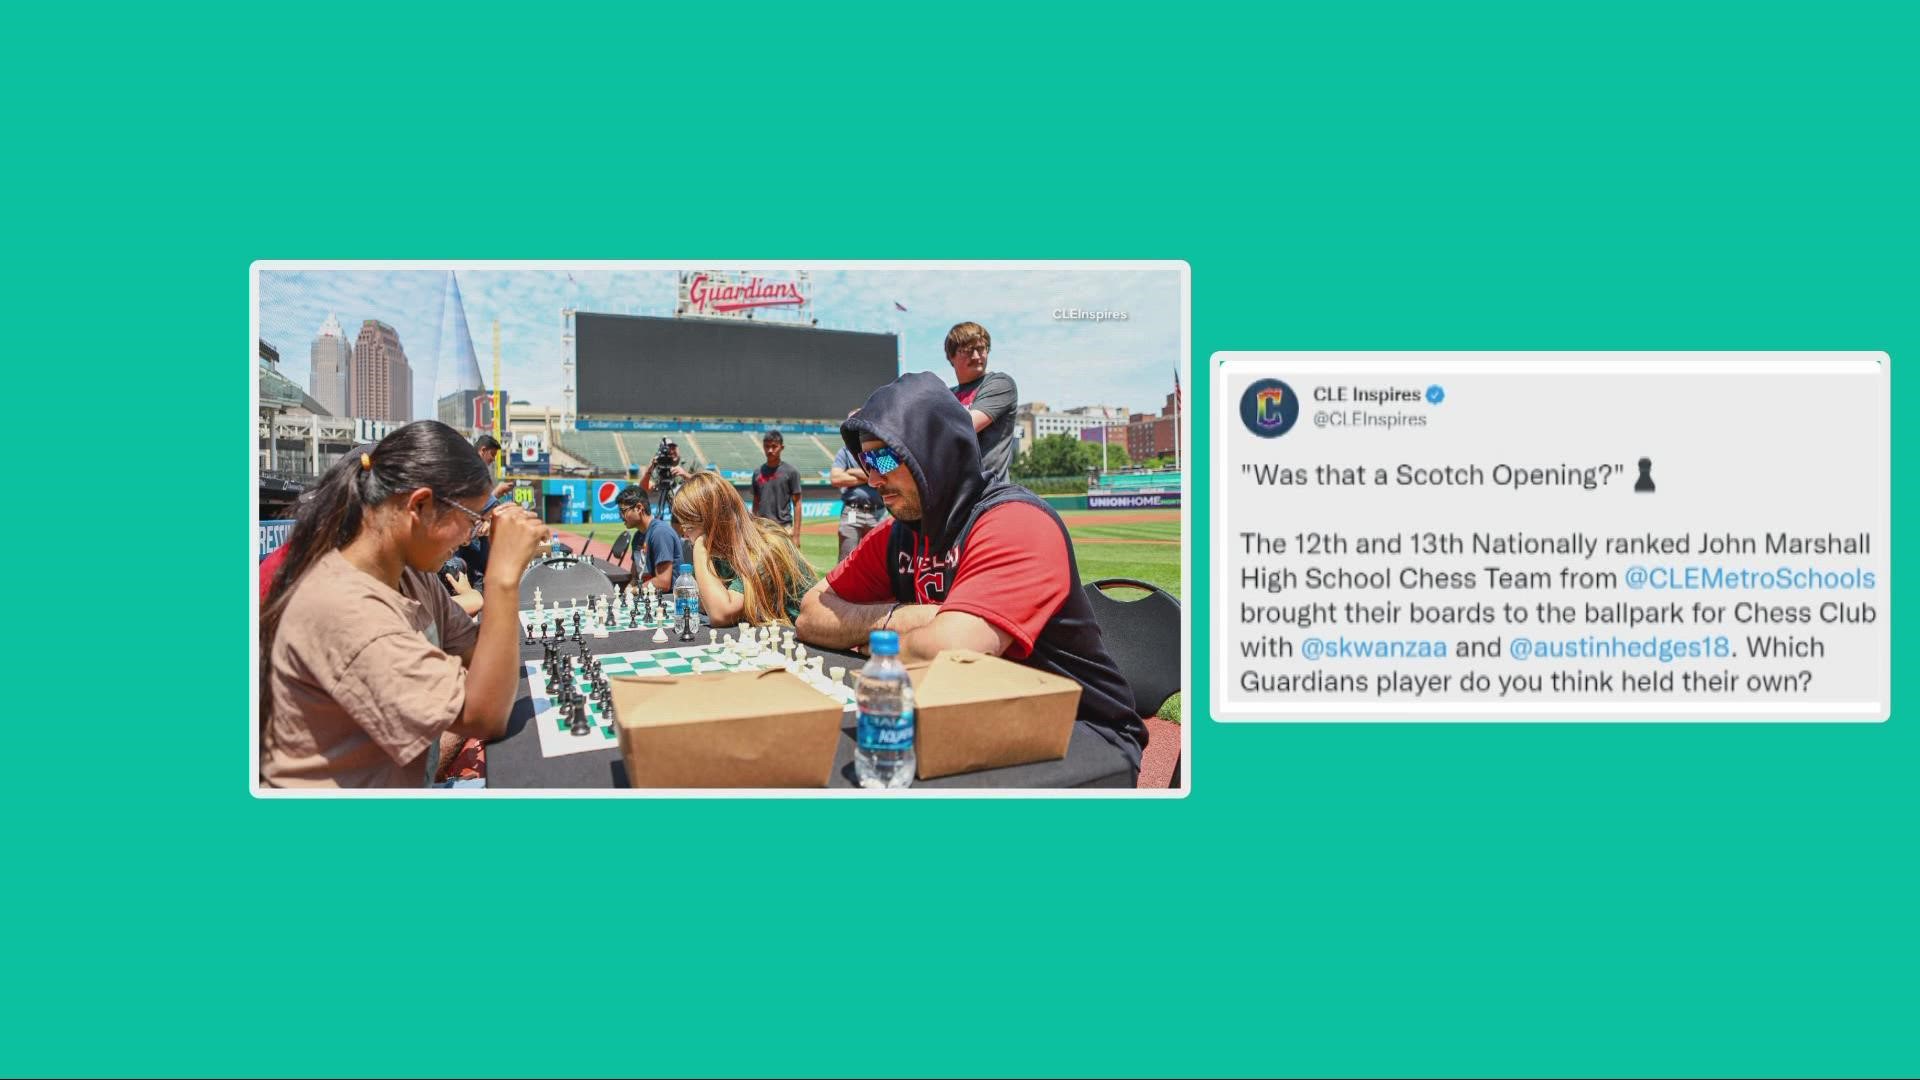 Today's Show Us Something Good comes from Progressive Field, where Guardians players Steven Kwan and Austin Hedges played took on some local high school chess stars.